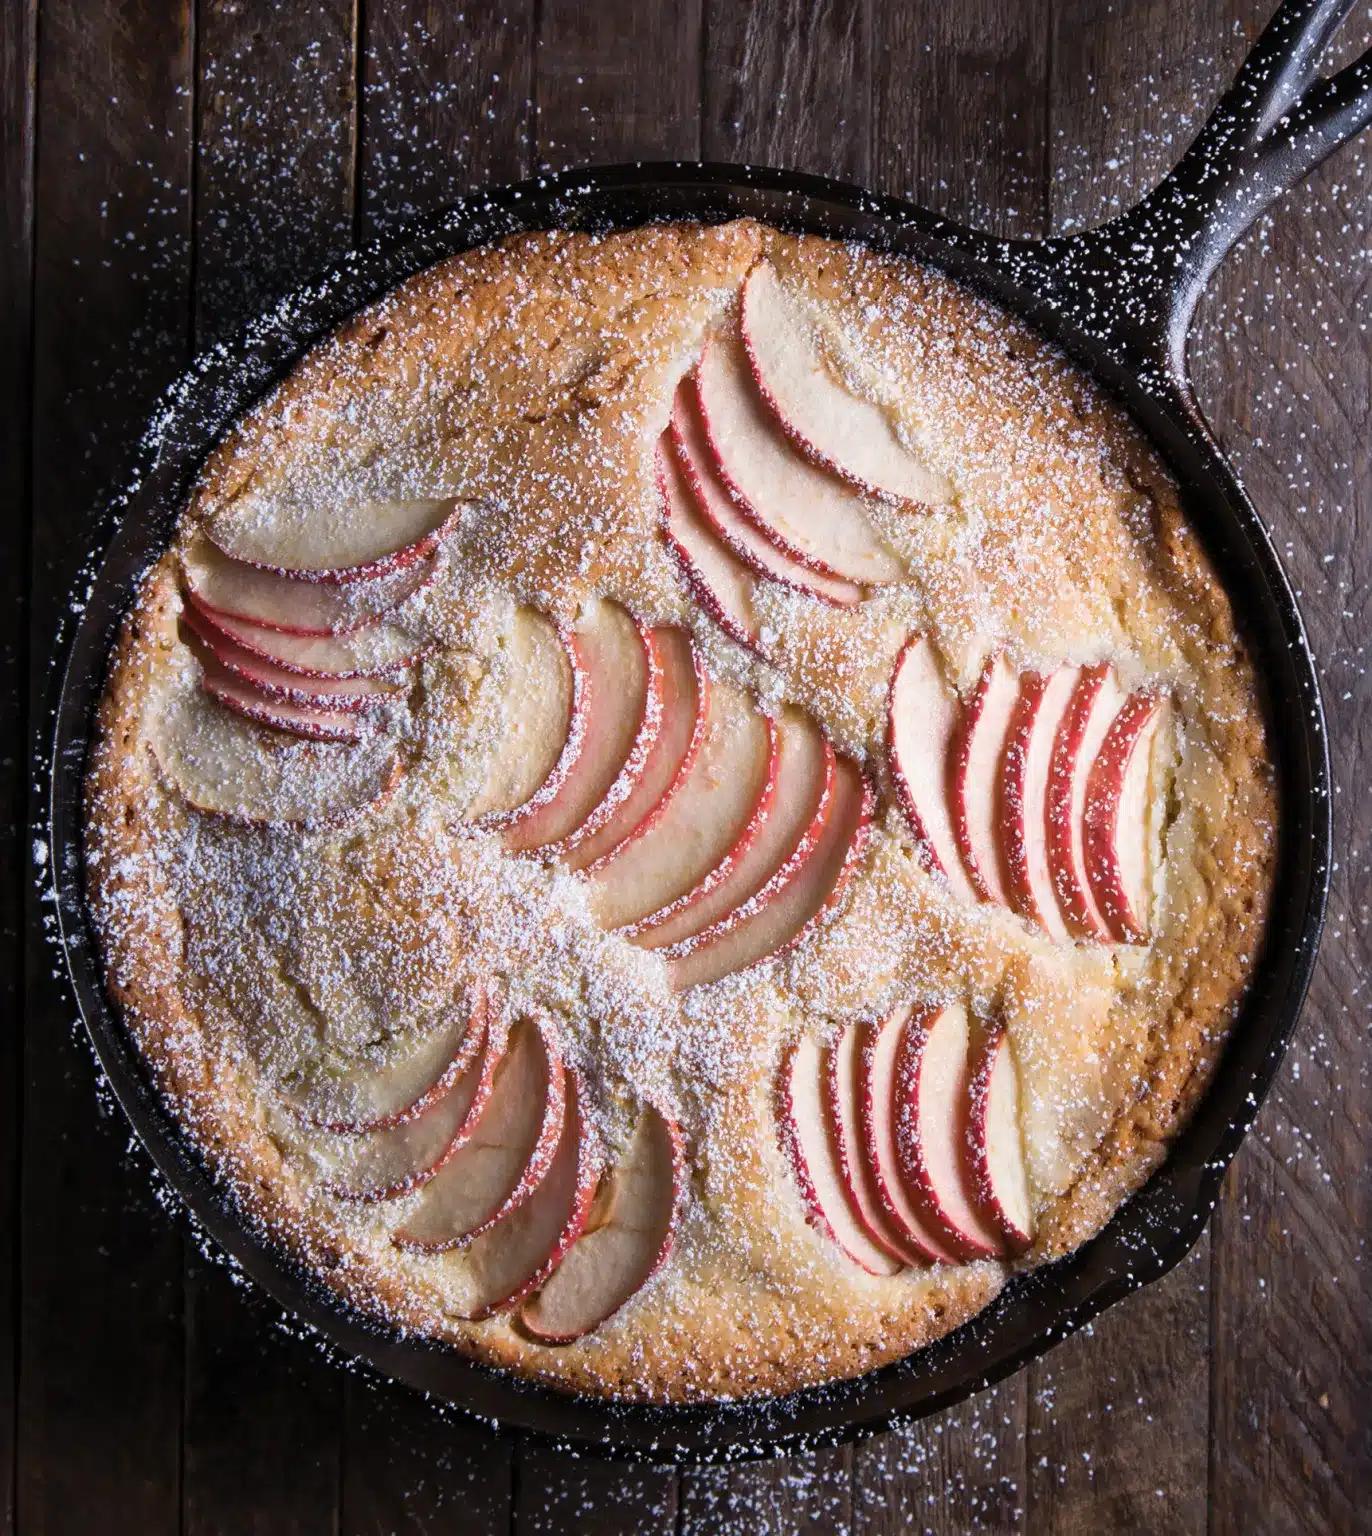 Cake in a cast iron skillet with apple slices.